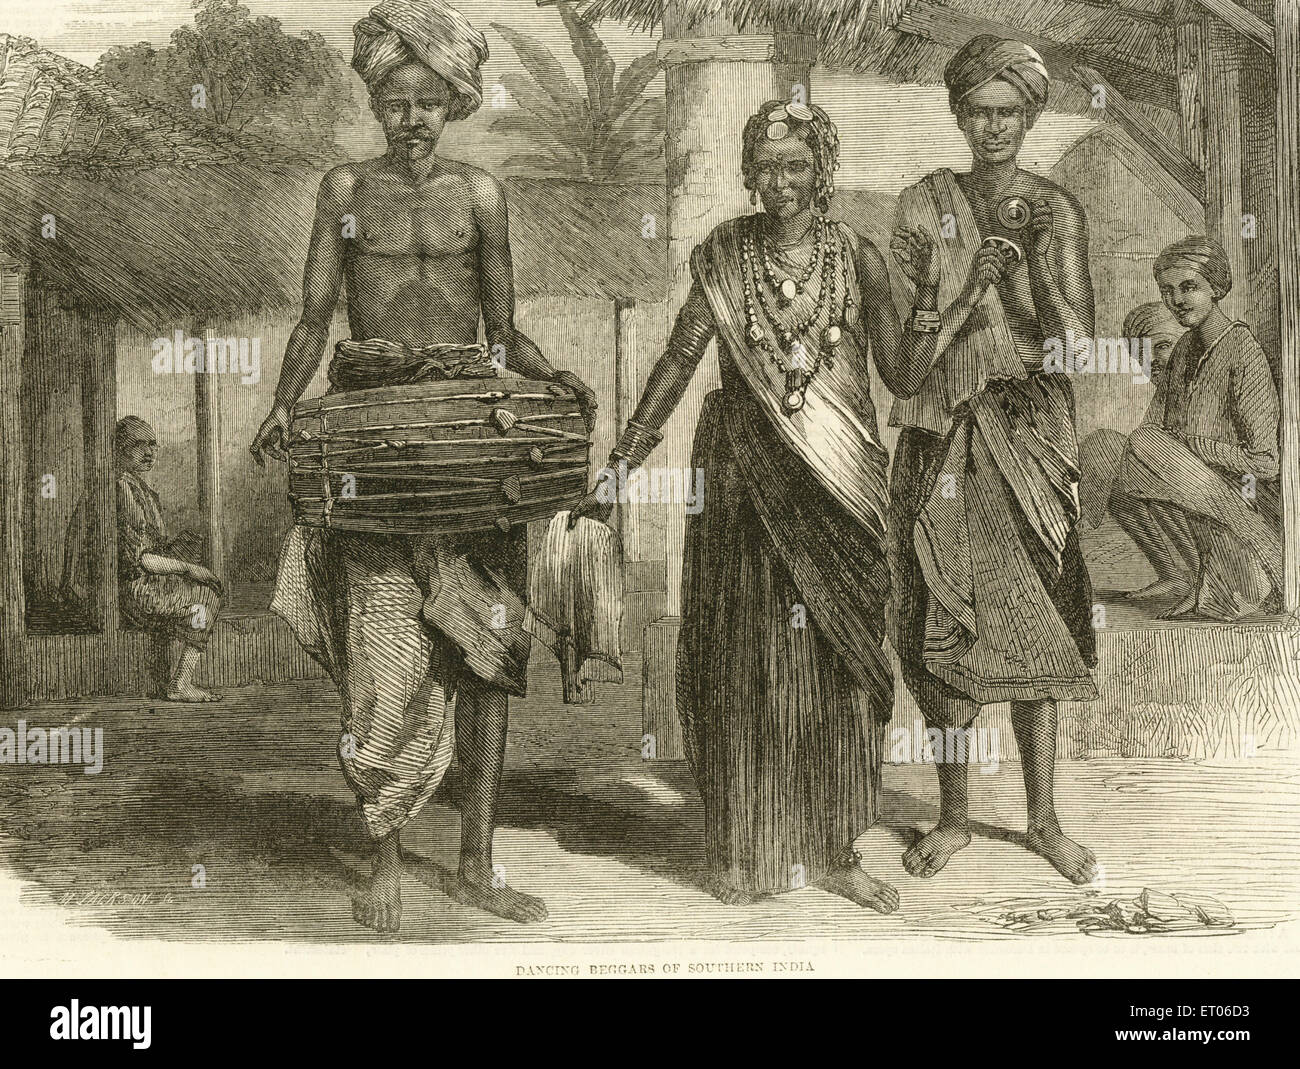 Dancing beggars of Southern India Stock Photo